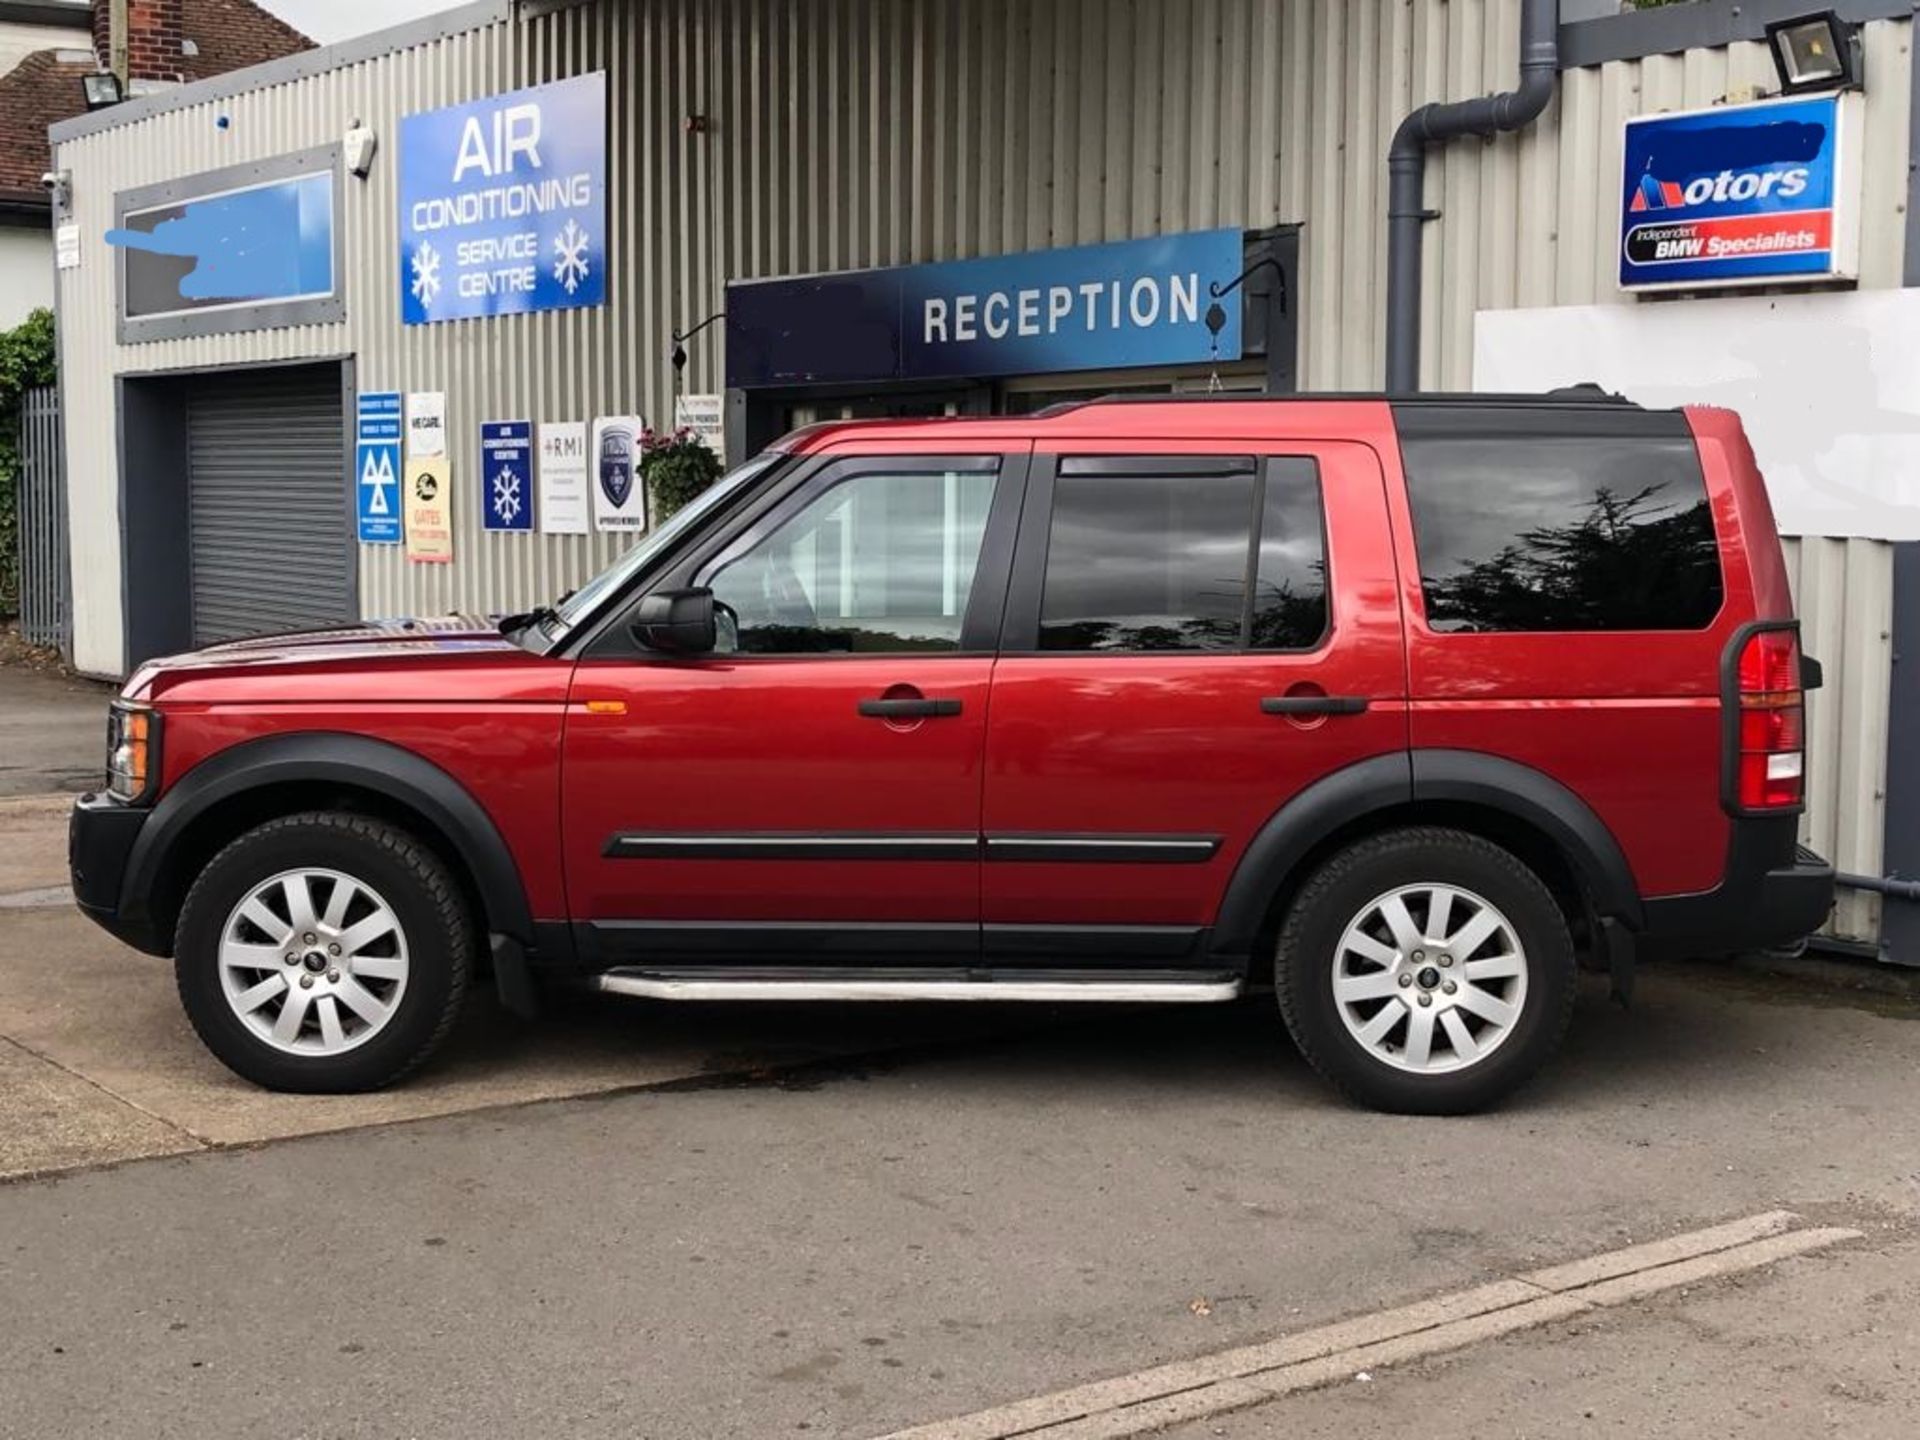 2006/56 REG LAND ROVER DISCOVERY 3 TDV6 SE AUTO 2.7 DIESEL 4X4 RED 7 SEATER *NO VAT* - Image 3 of 21